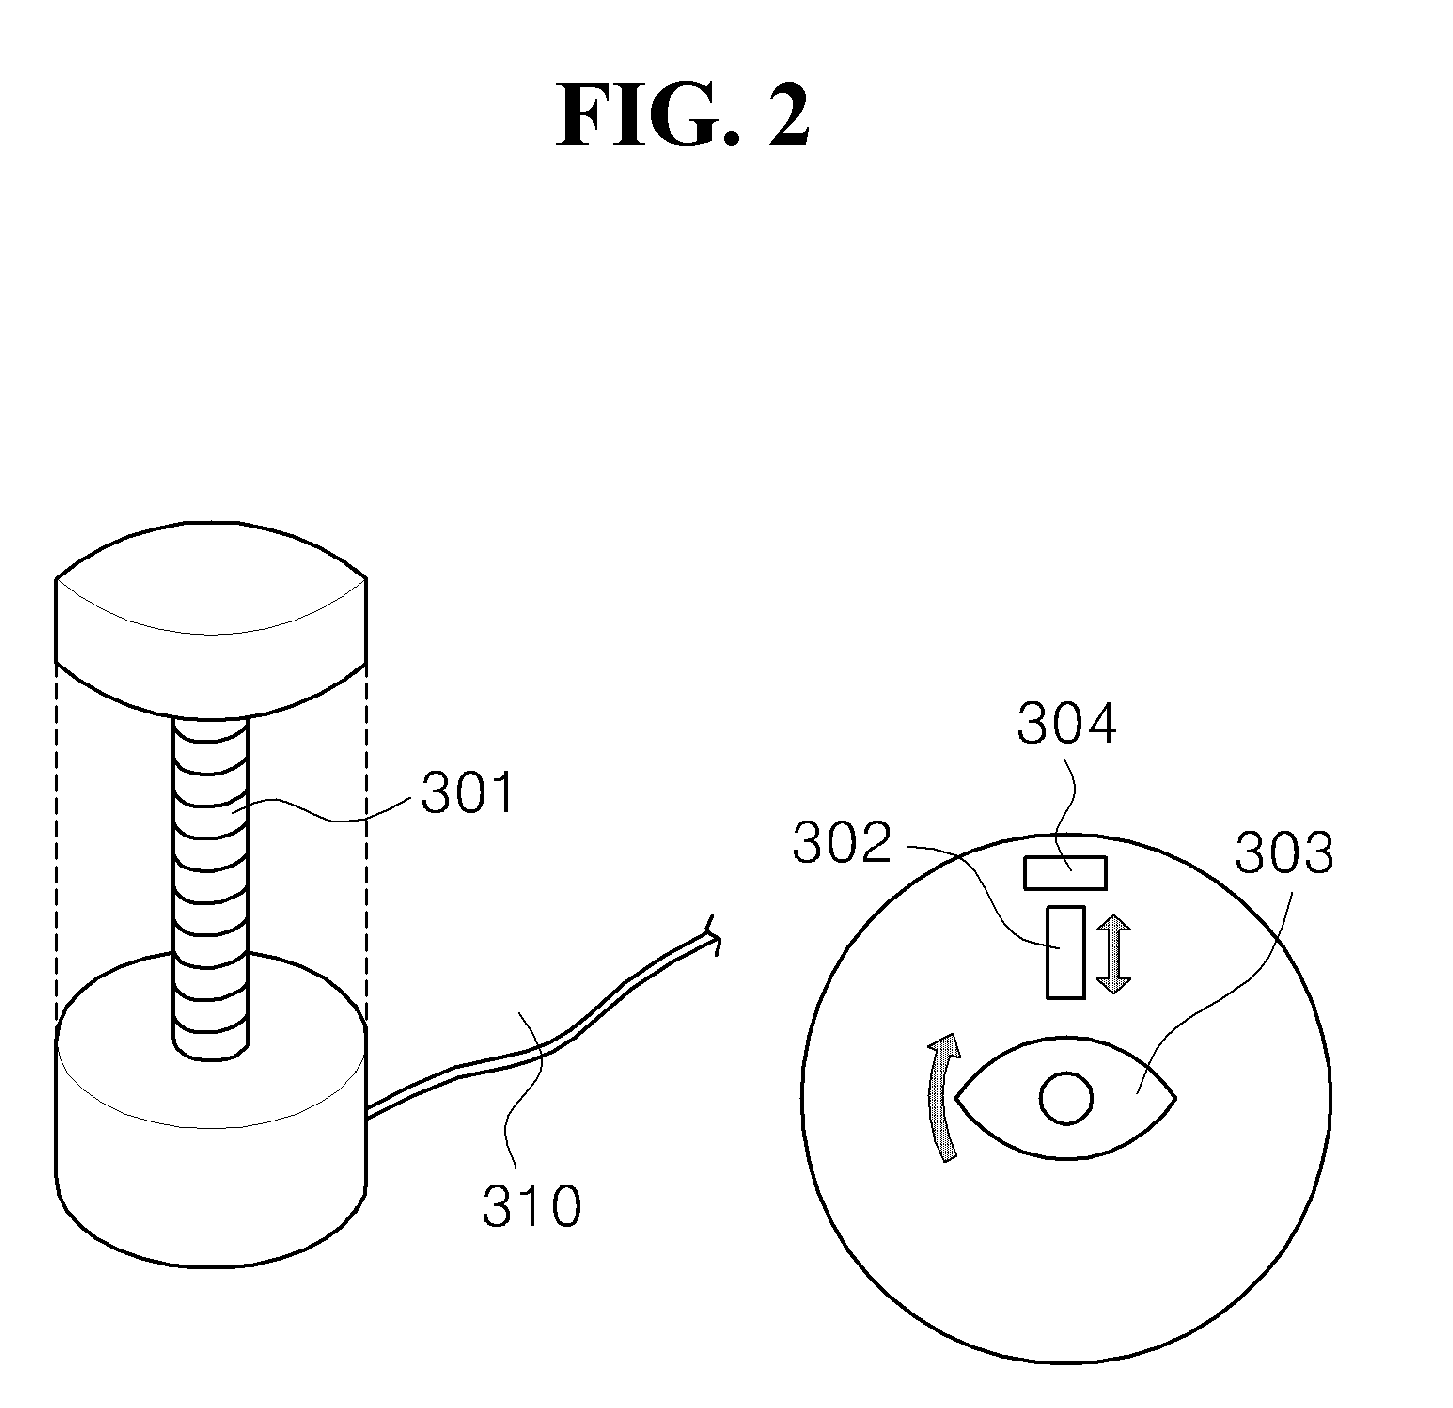 System and method for providing information on fuel savings, safe operation, and maintenance by real-time predictive monitoring and predictive controlling of aerodynamic and hydrodynamic environmental internal/external forces, hull stresses, motion with six degrees of freedom, and the location of marine structure